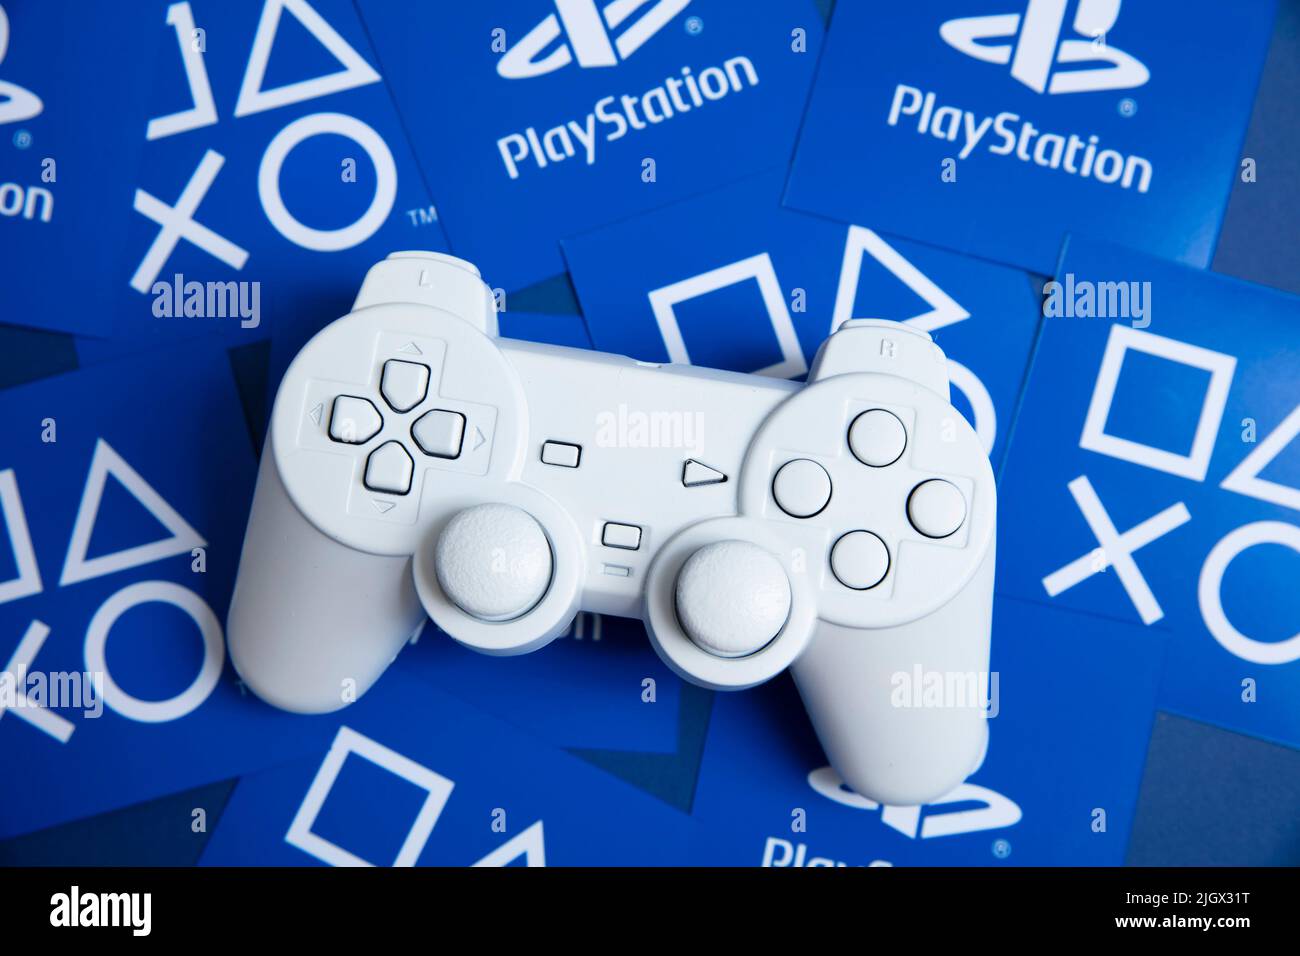 LONDON, UK - July 2022: Sony playstation logo against a blue background. Playstation is a video game brand Stock Photo